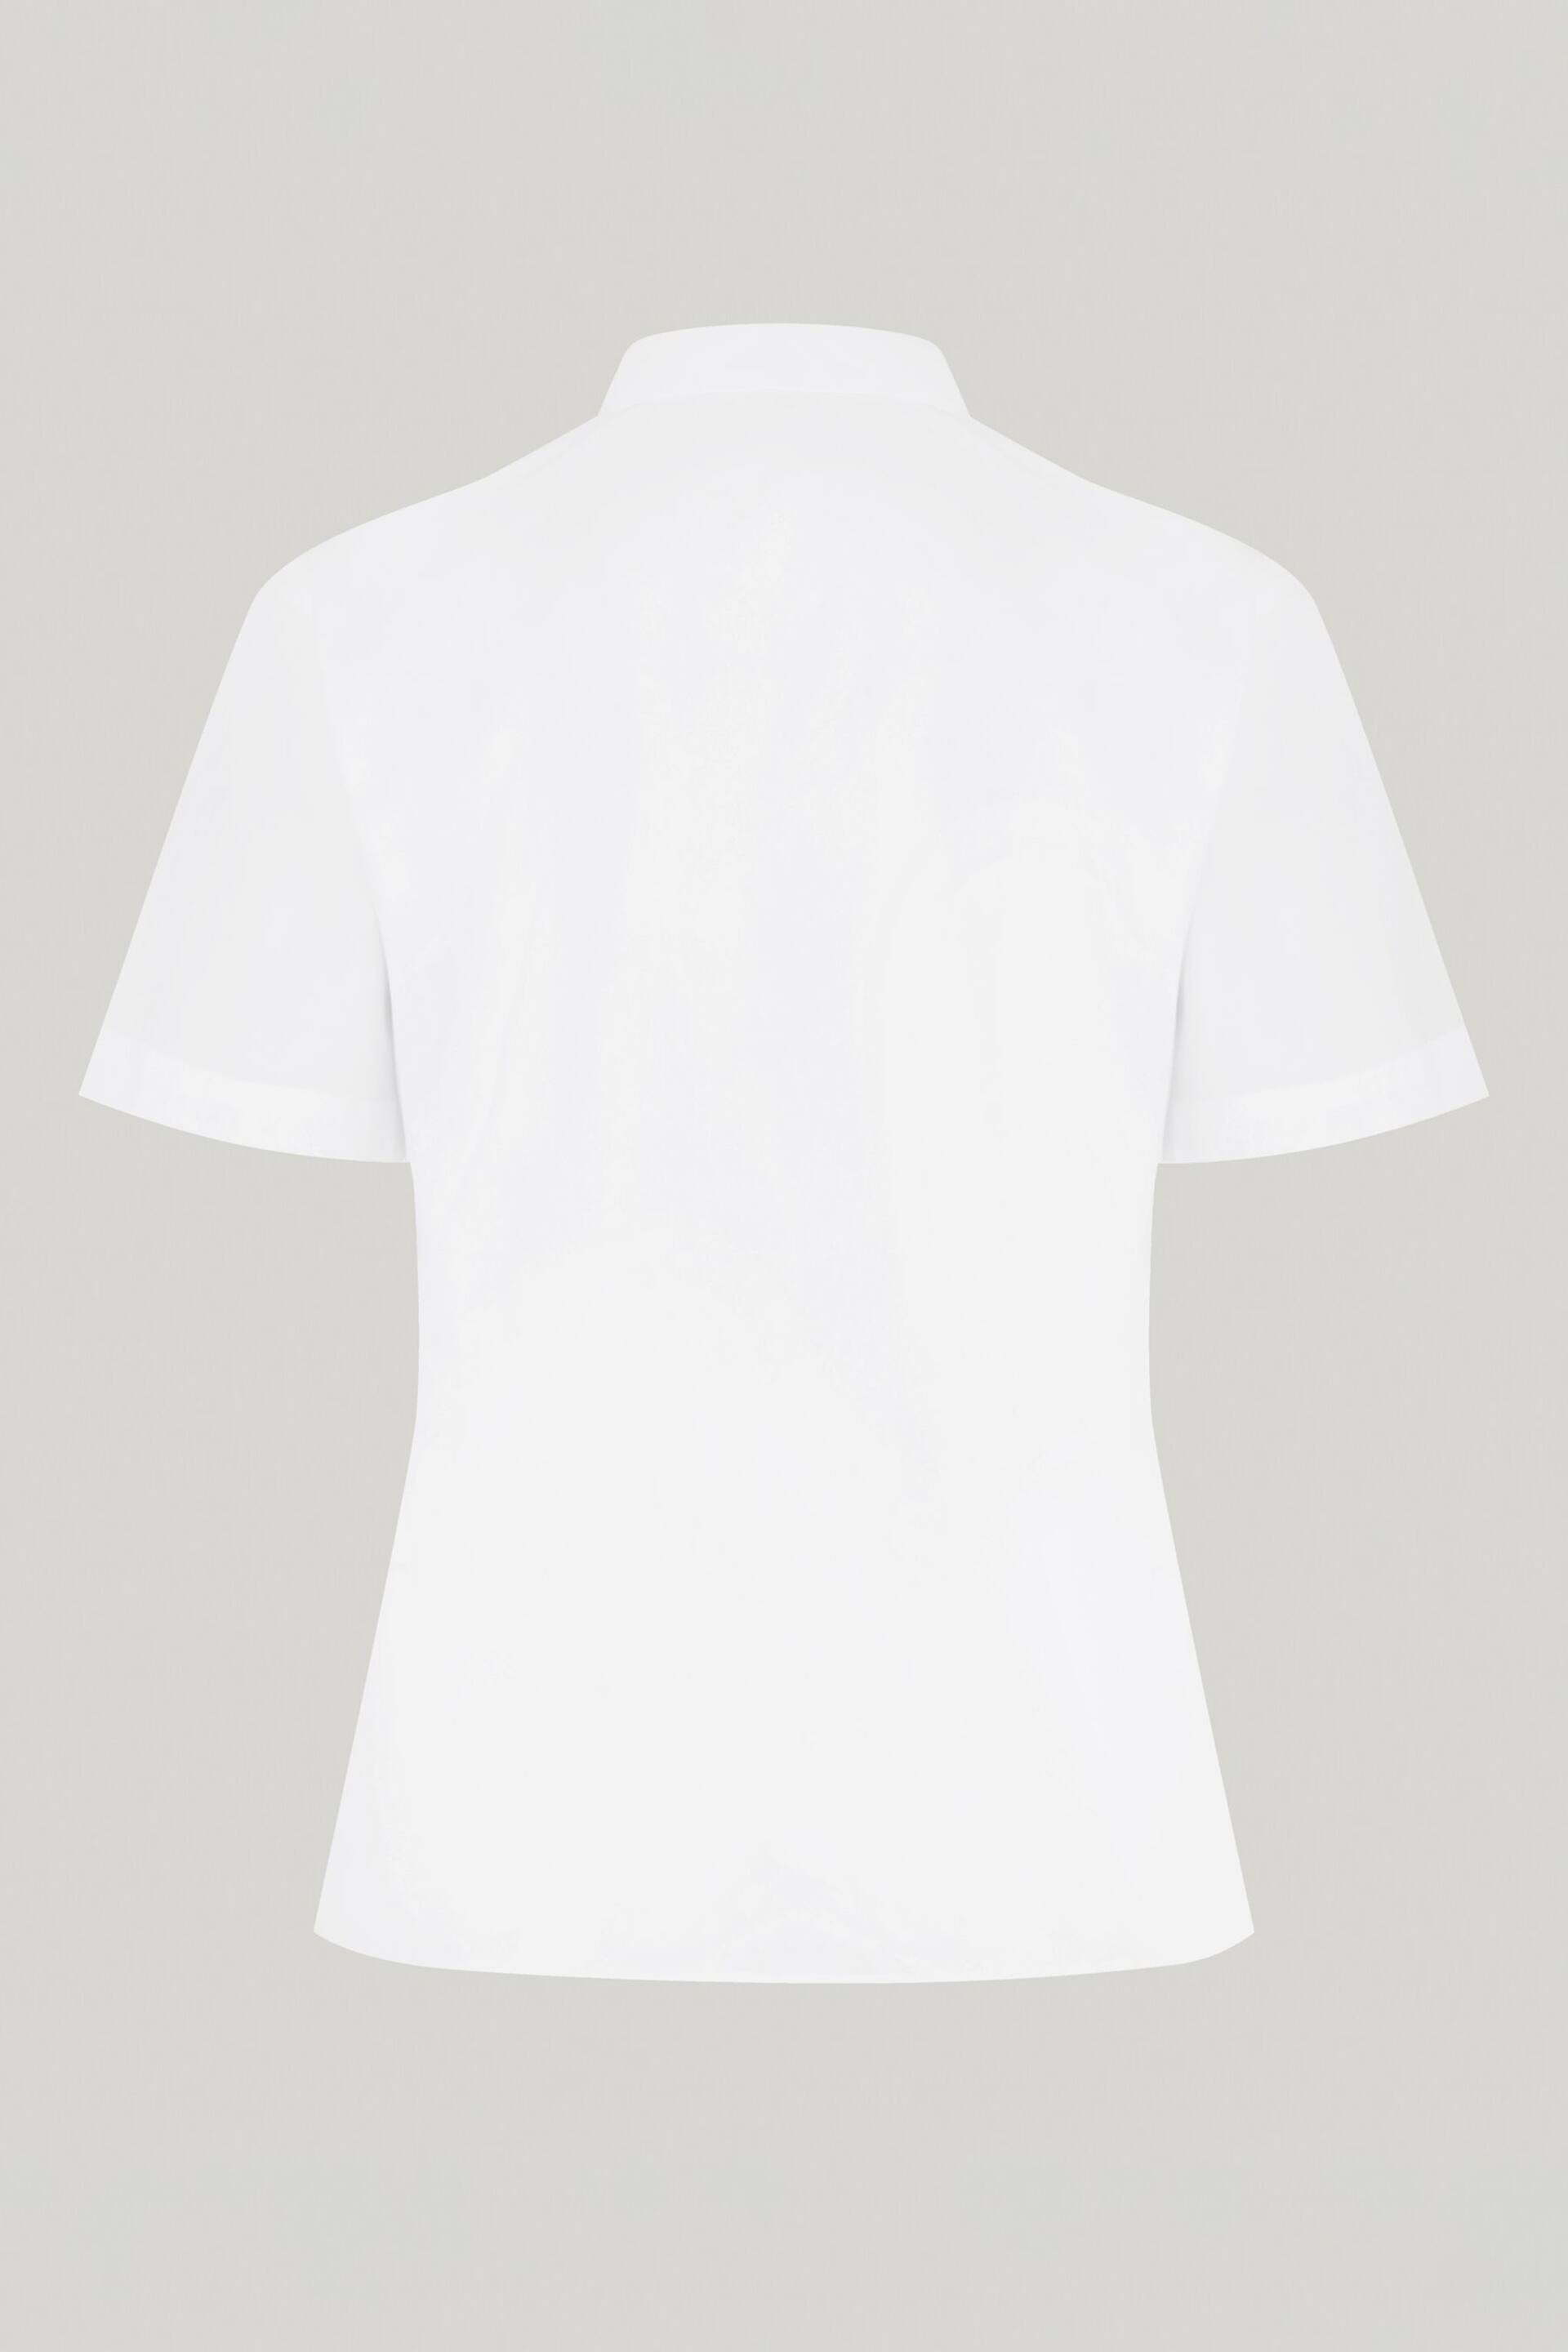 Trutex White Regular Fit Short Sleeve 2 Pack School Shirts - Image 7 of 7